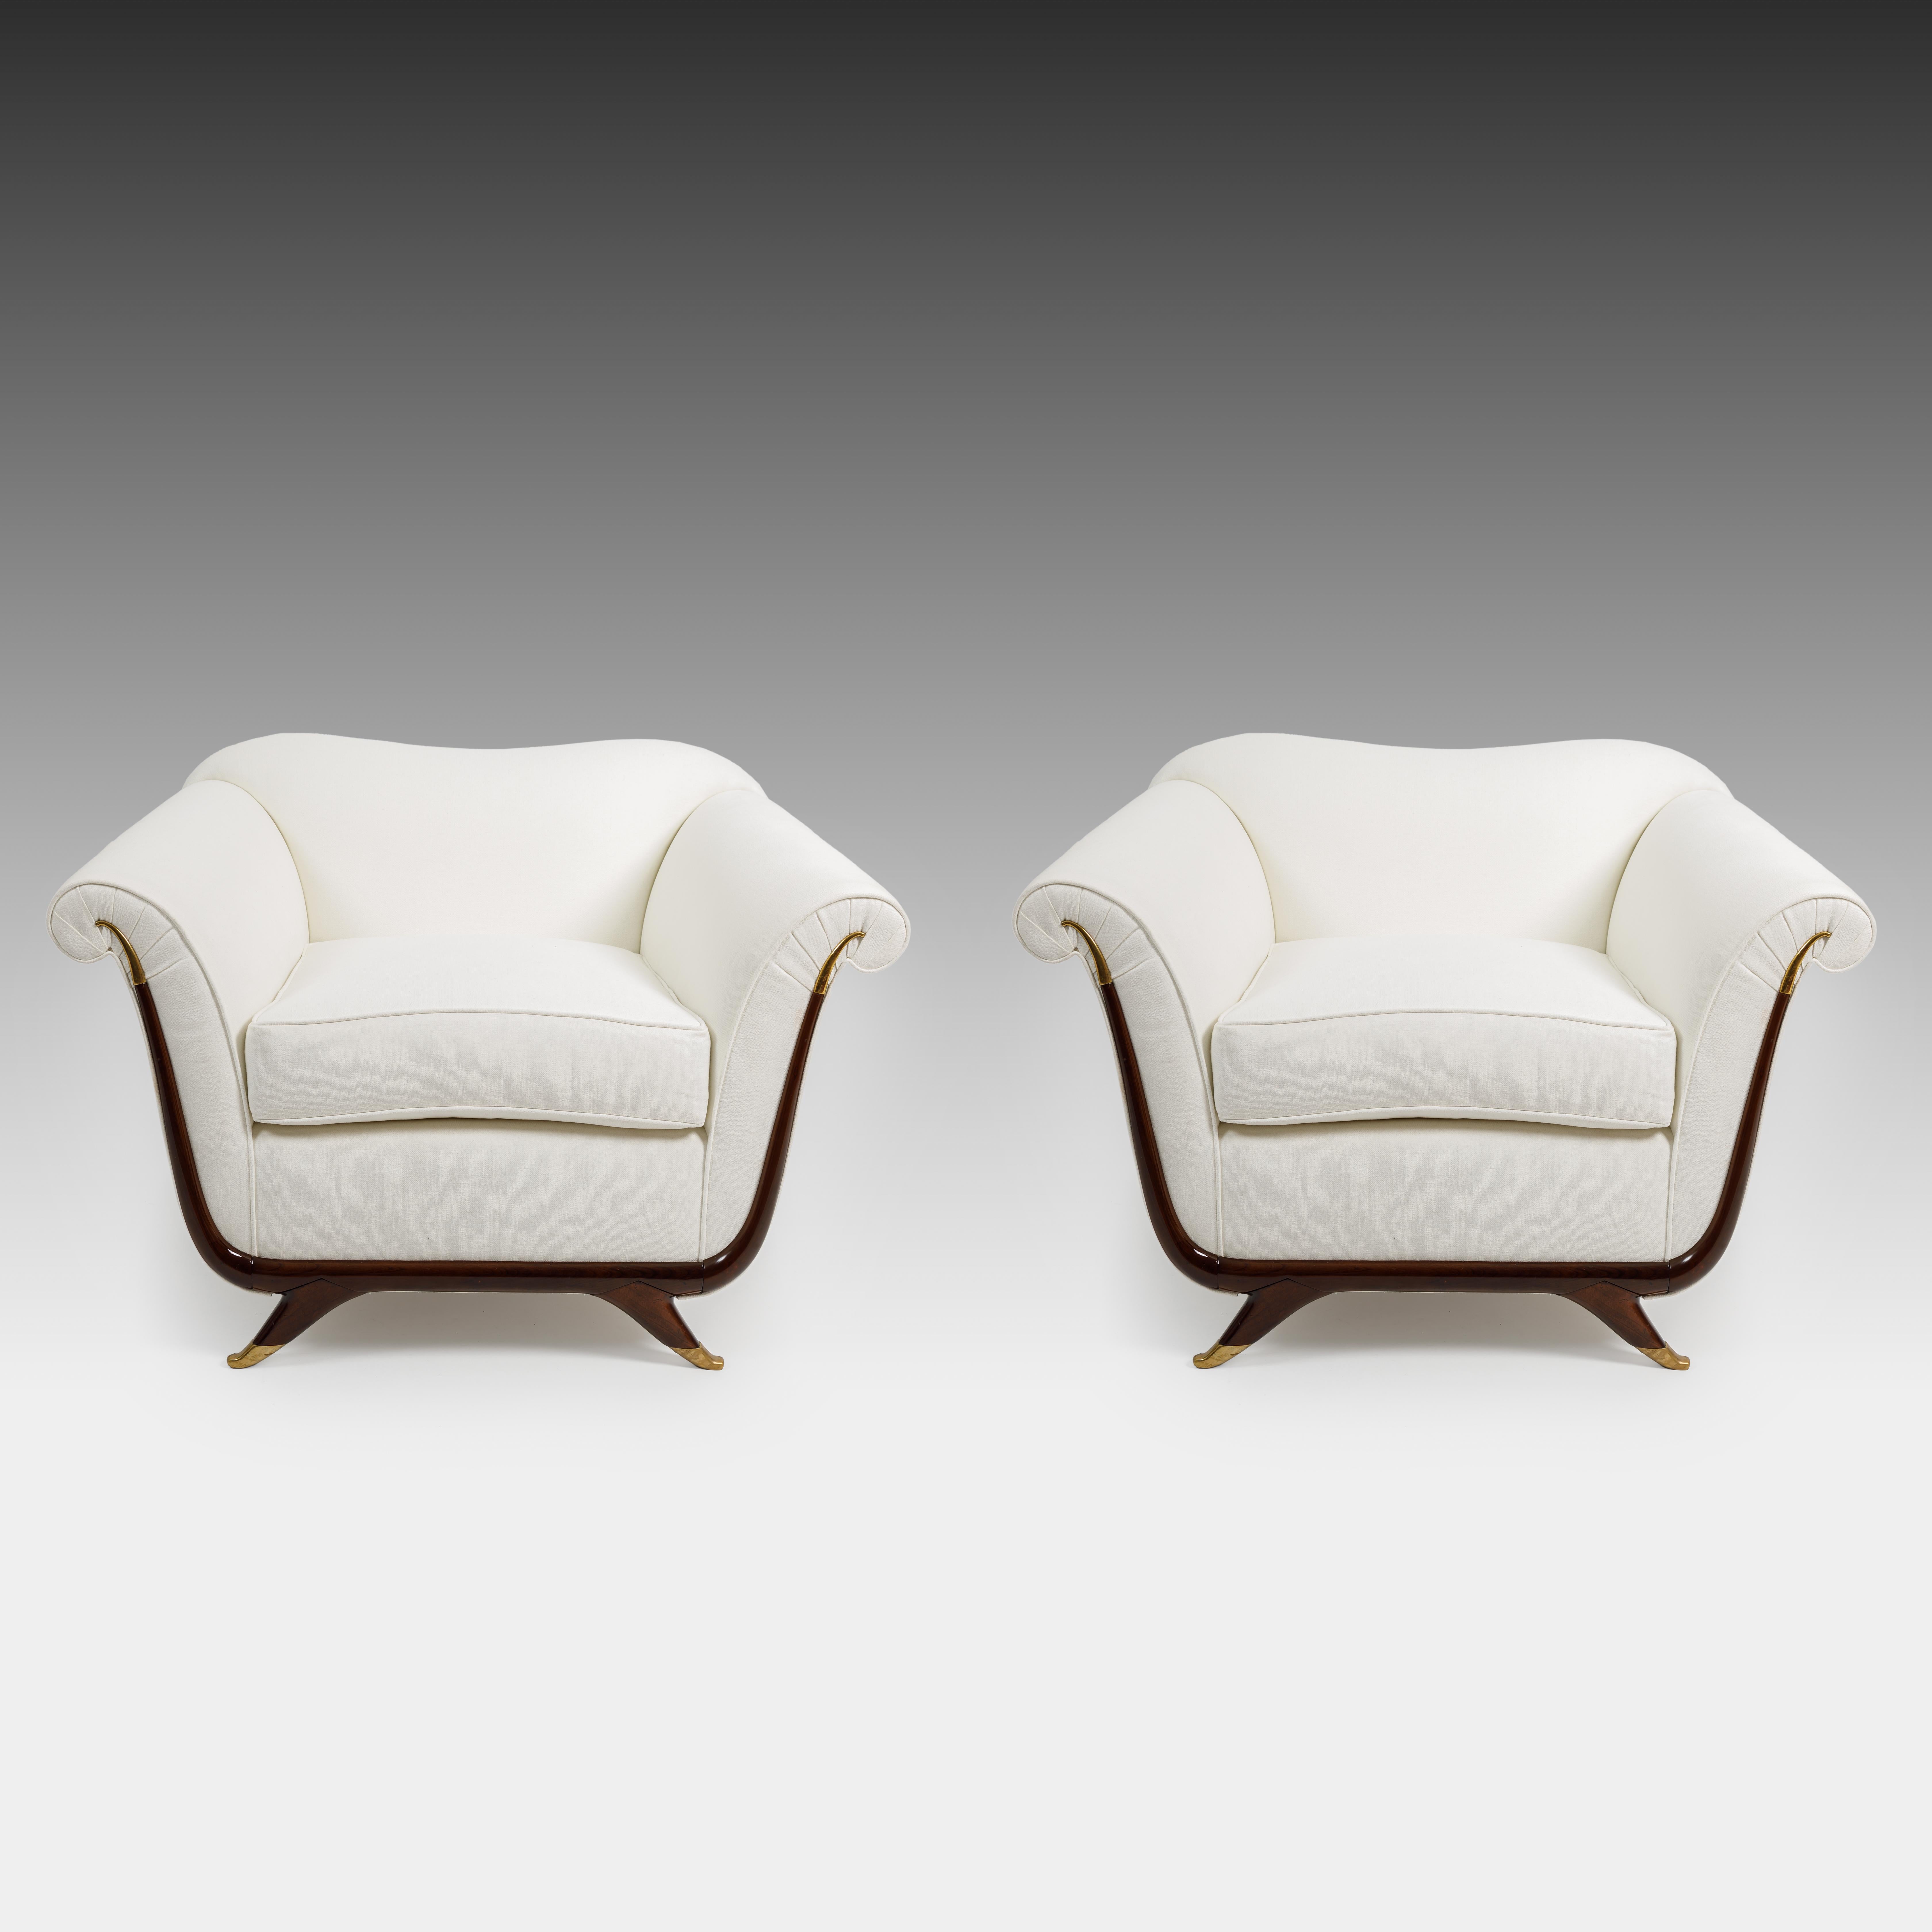 Salon Set of Sofa and Pair of Armchairs Attributed to Guglielmo Ulrich 1